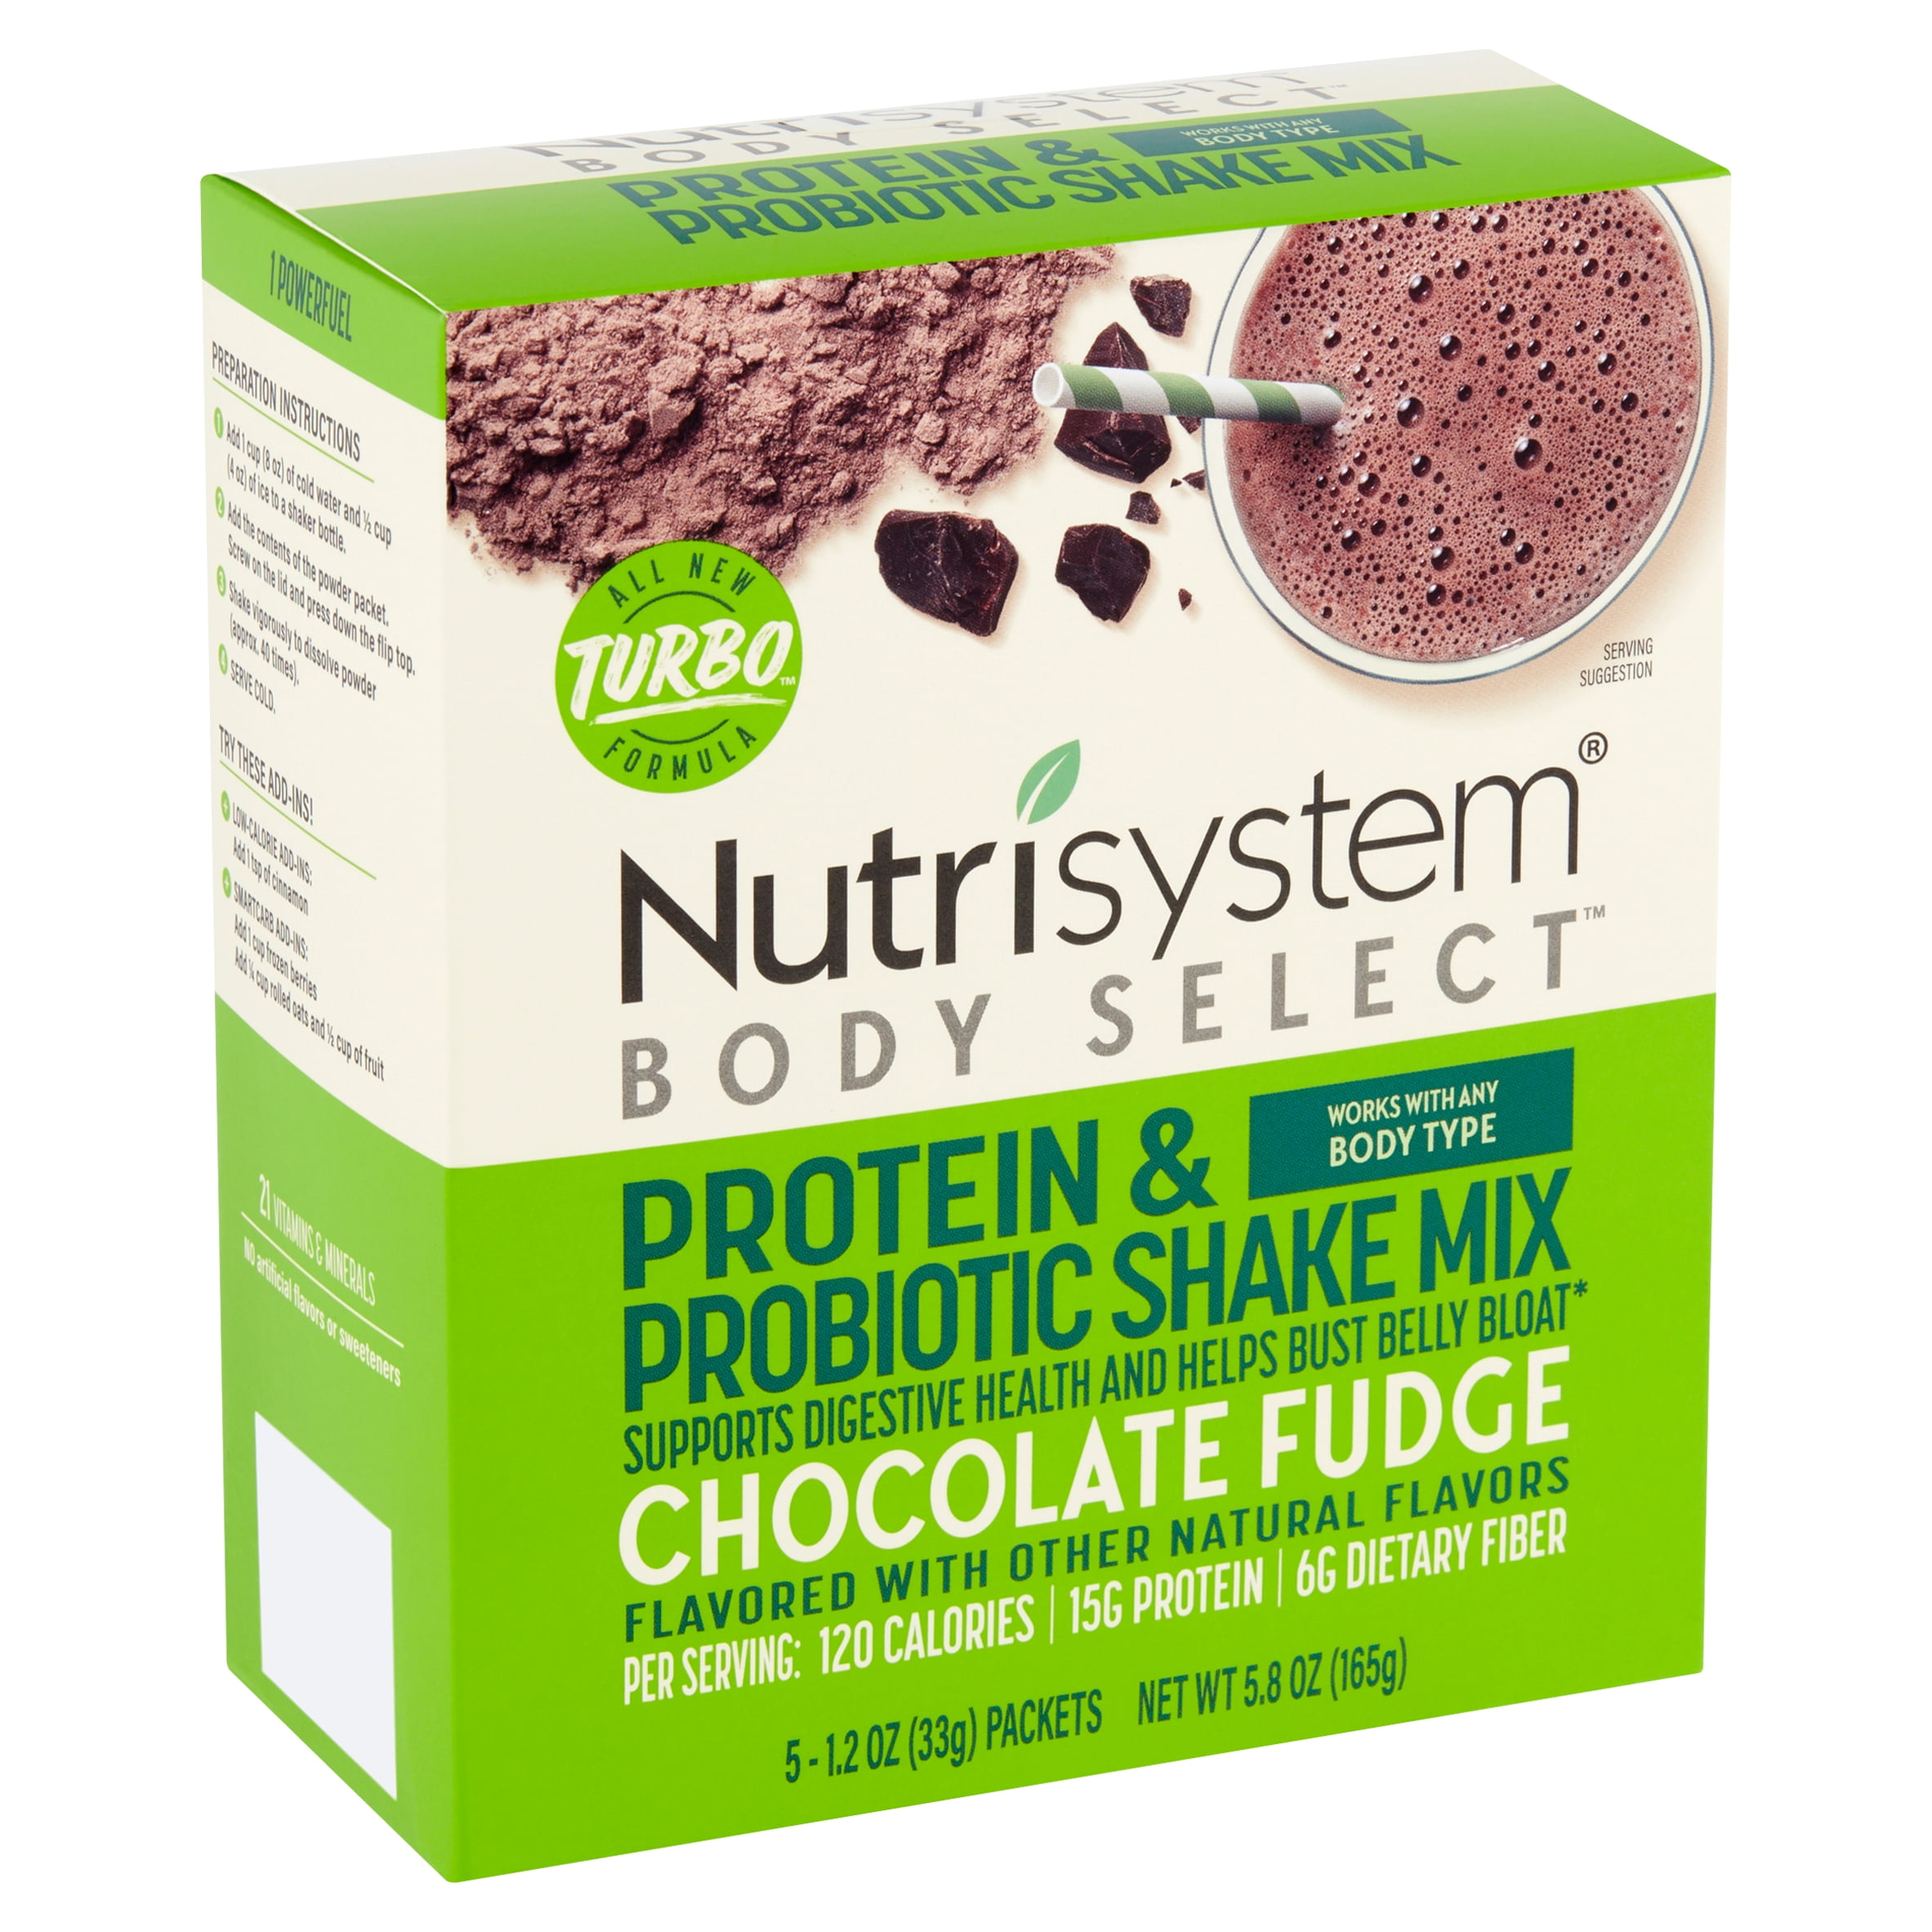 Nutrisystem PROSYNC Shake Mix Chocolate Fudge Protein & Probiotics - 2  Containers - 16.3 oz. each - 28 Servings for sale online